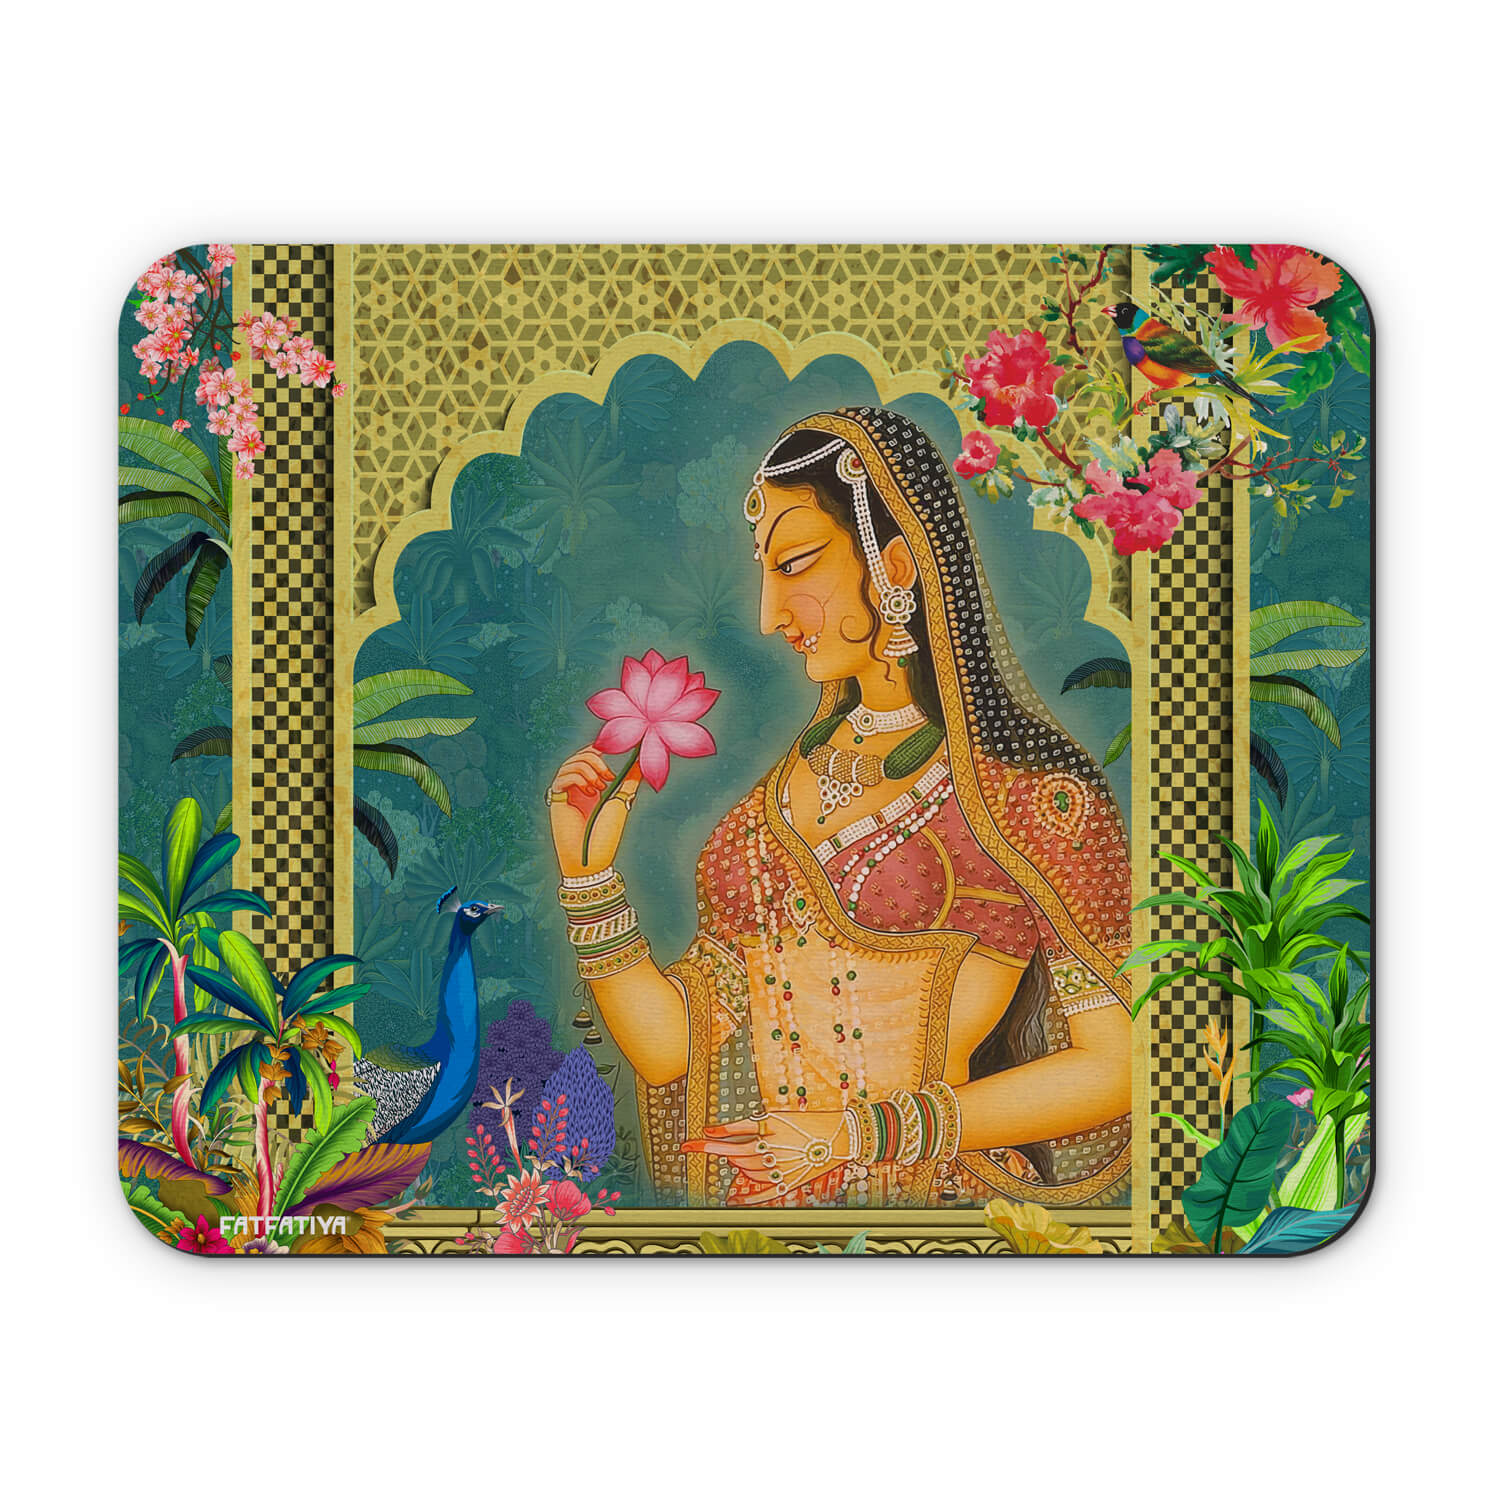 Bani Thani Queen Cute Computer Mouse Pad